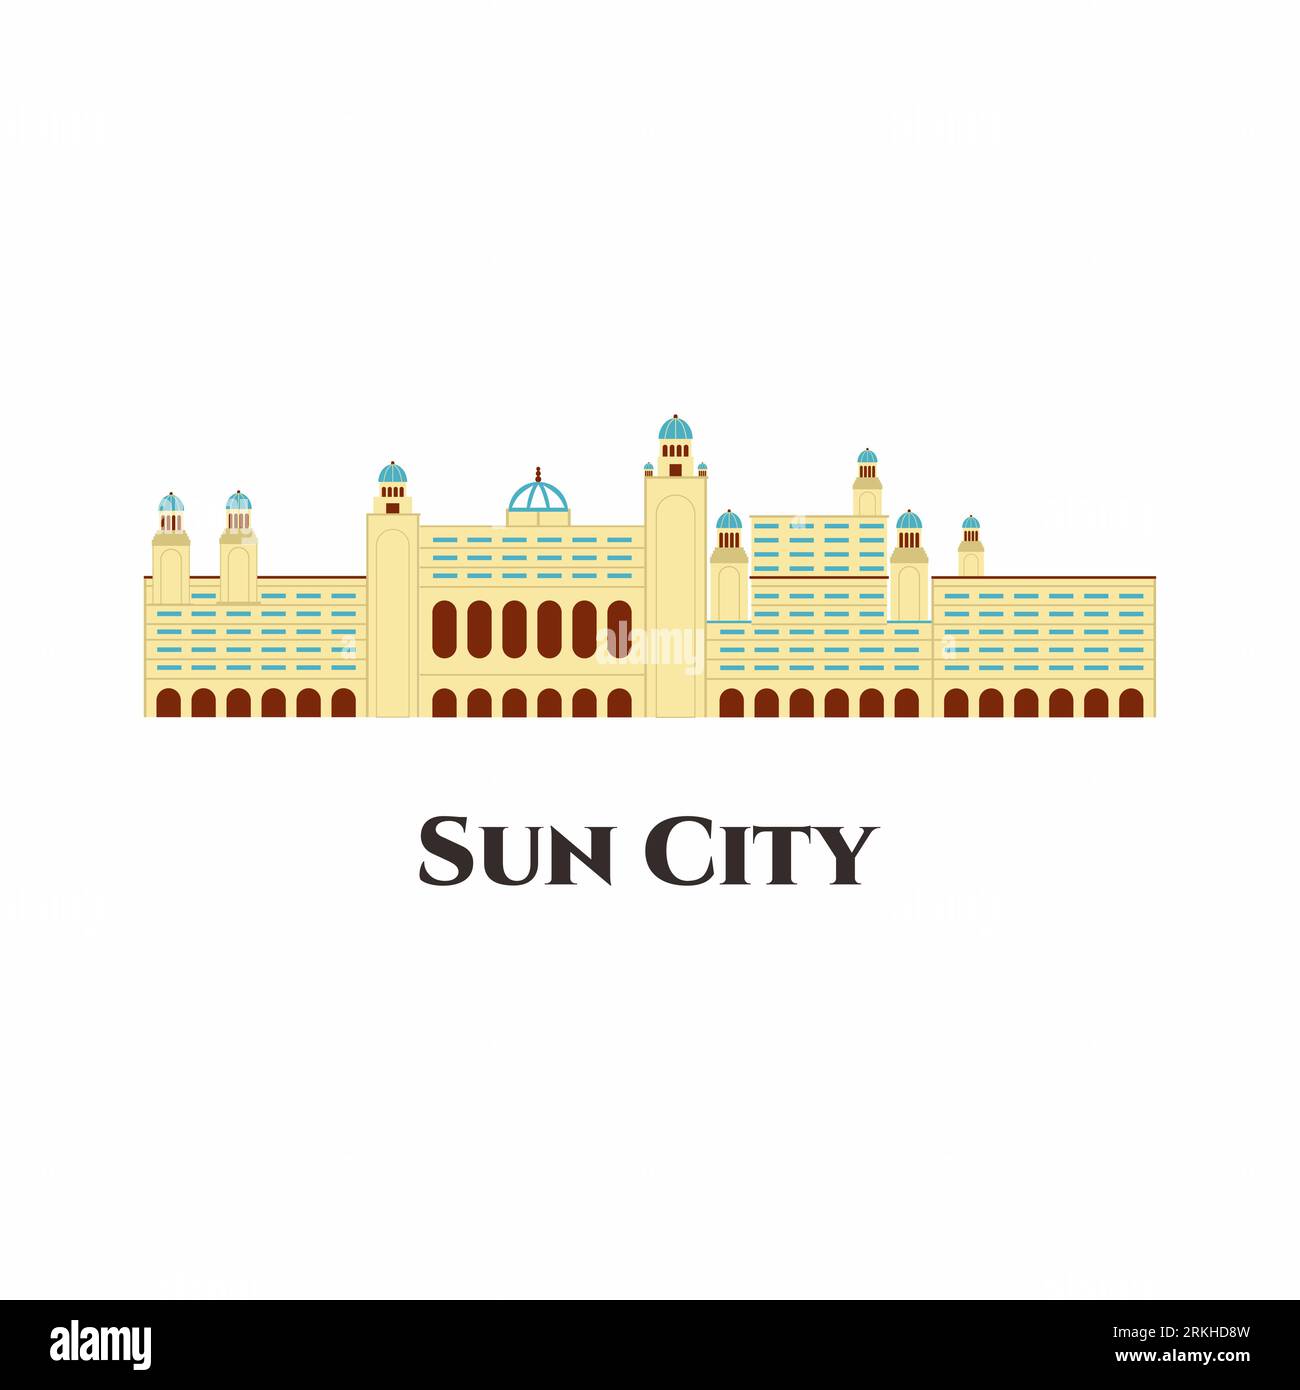 Sun City resort in South Africa vector icon flat cartoon. It is a premium destination with a host of hotels, attractions and kids activities. Great de Stock Vector